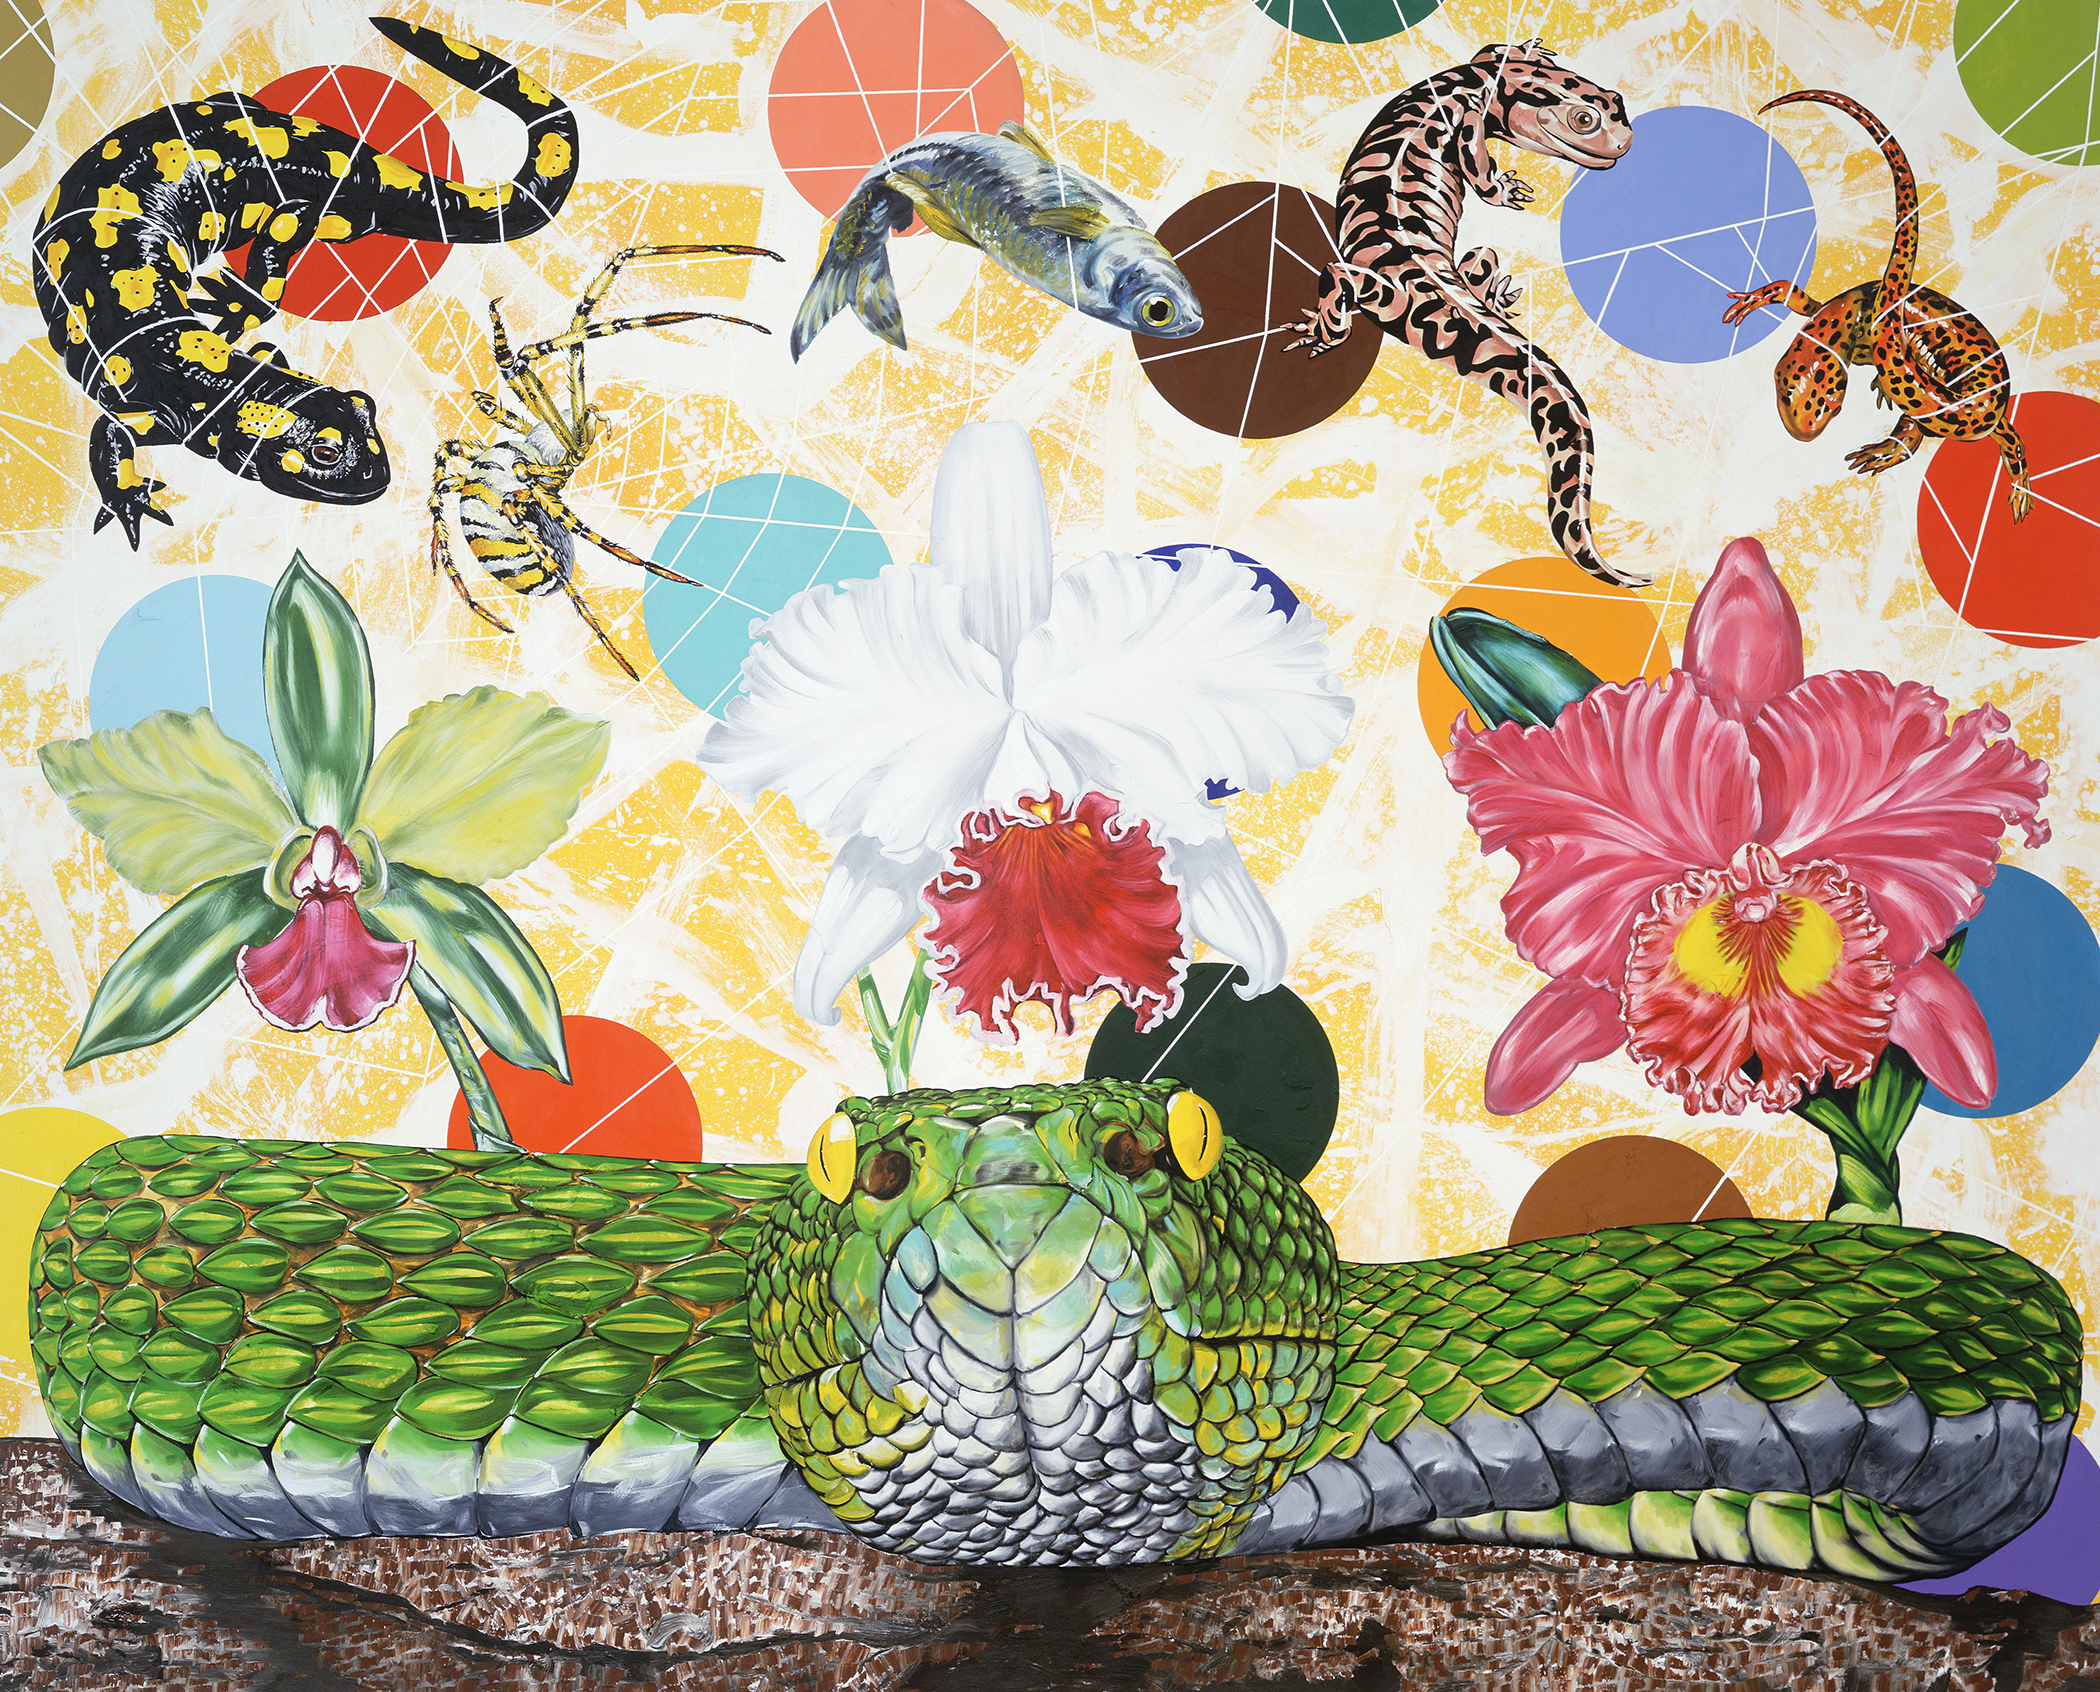 A green snake in the foreground with bright circles, reptiles and tropical flowers in the background